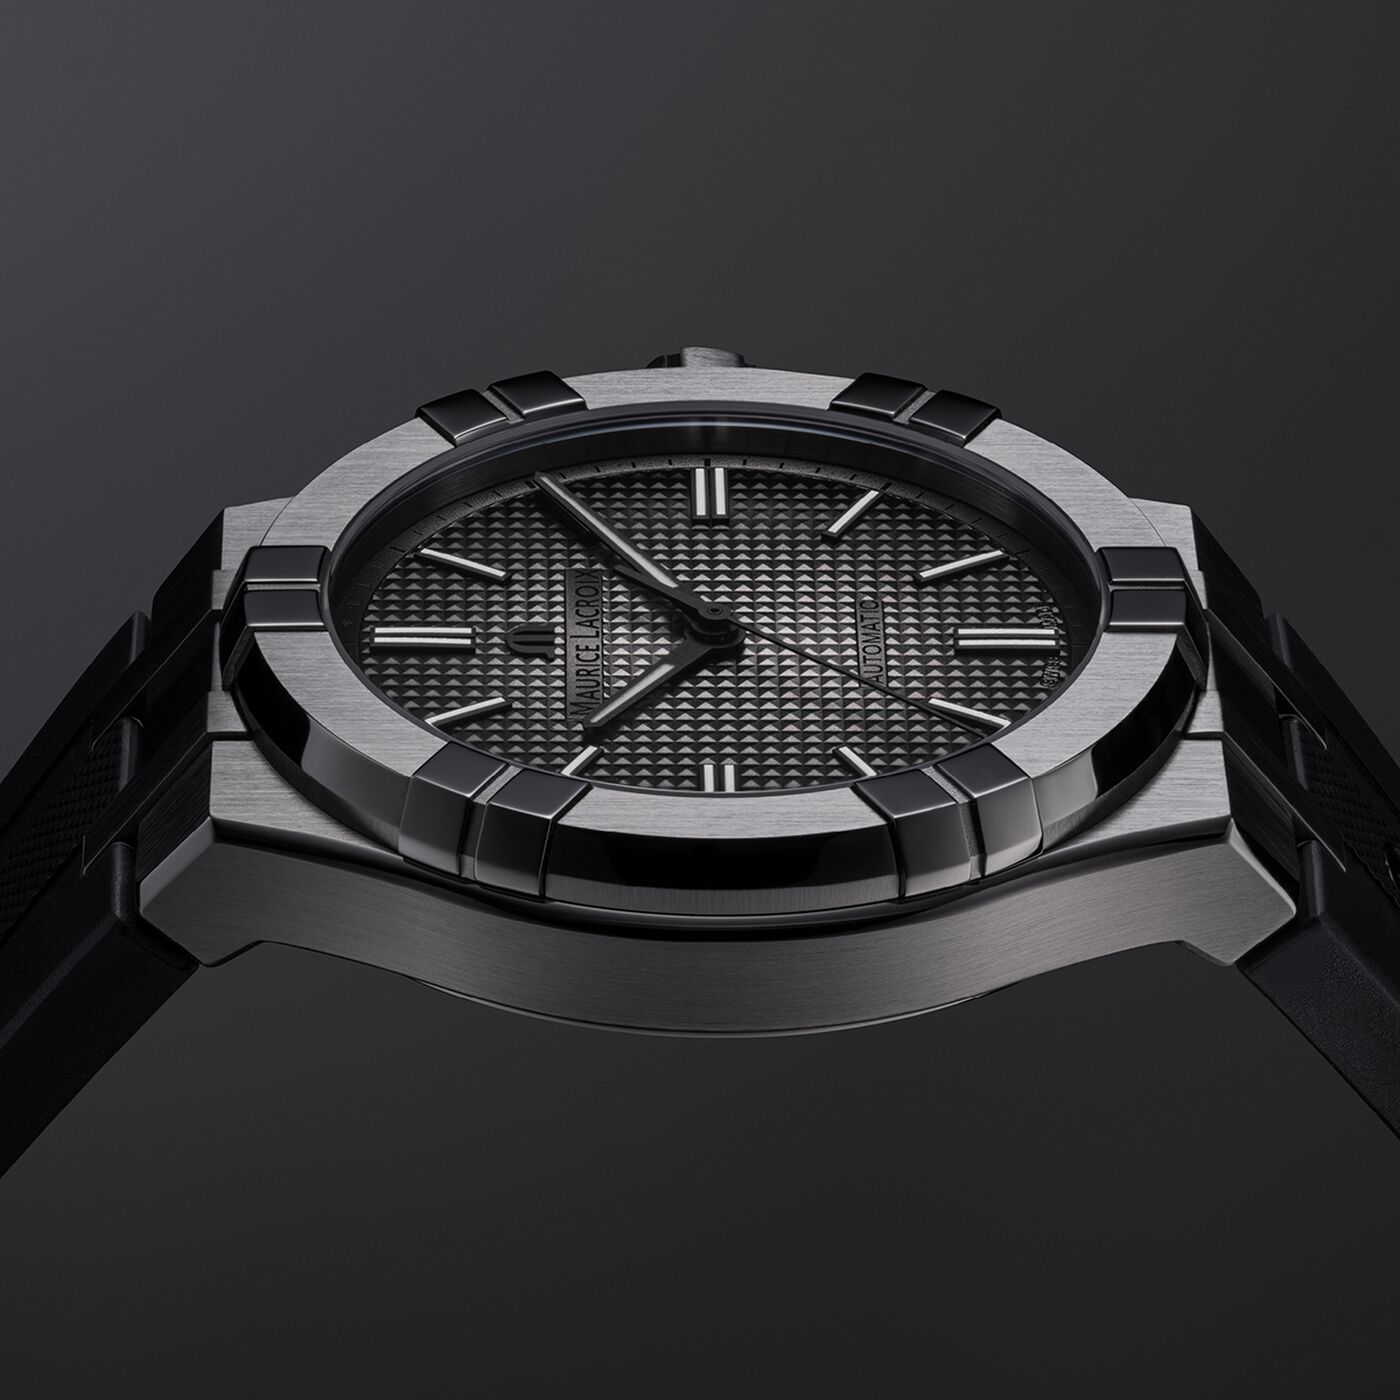 AIKON AUTOMATIC 42MM GUNMETAL PVD LIMITED EDITION